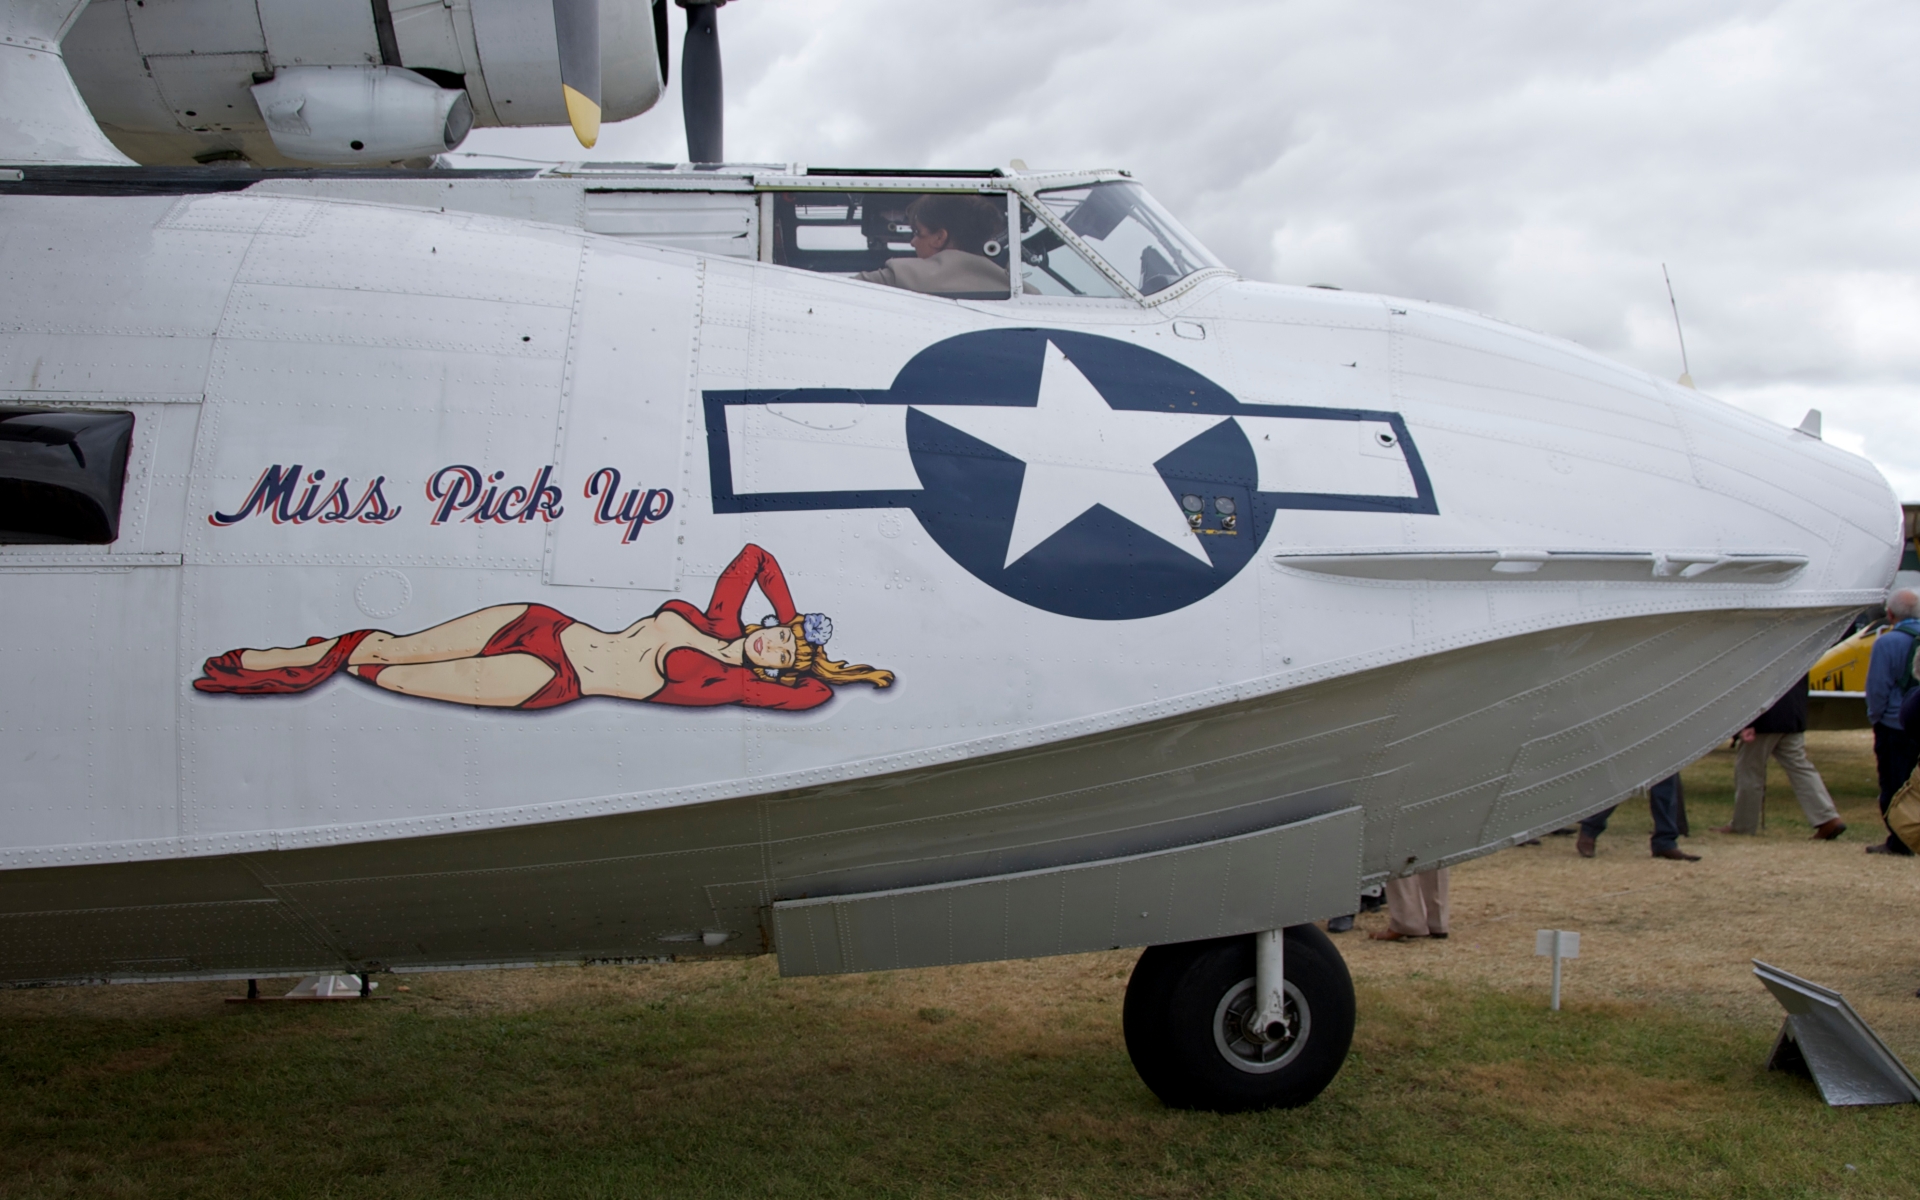 Aircraft Nose Art Full HD Wallpaper and Background Image | 1920x1200 | ID:554069